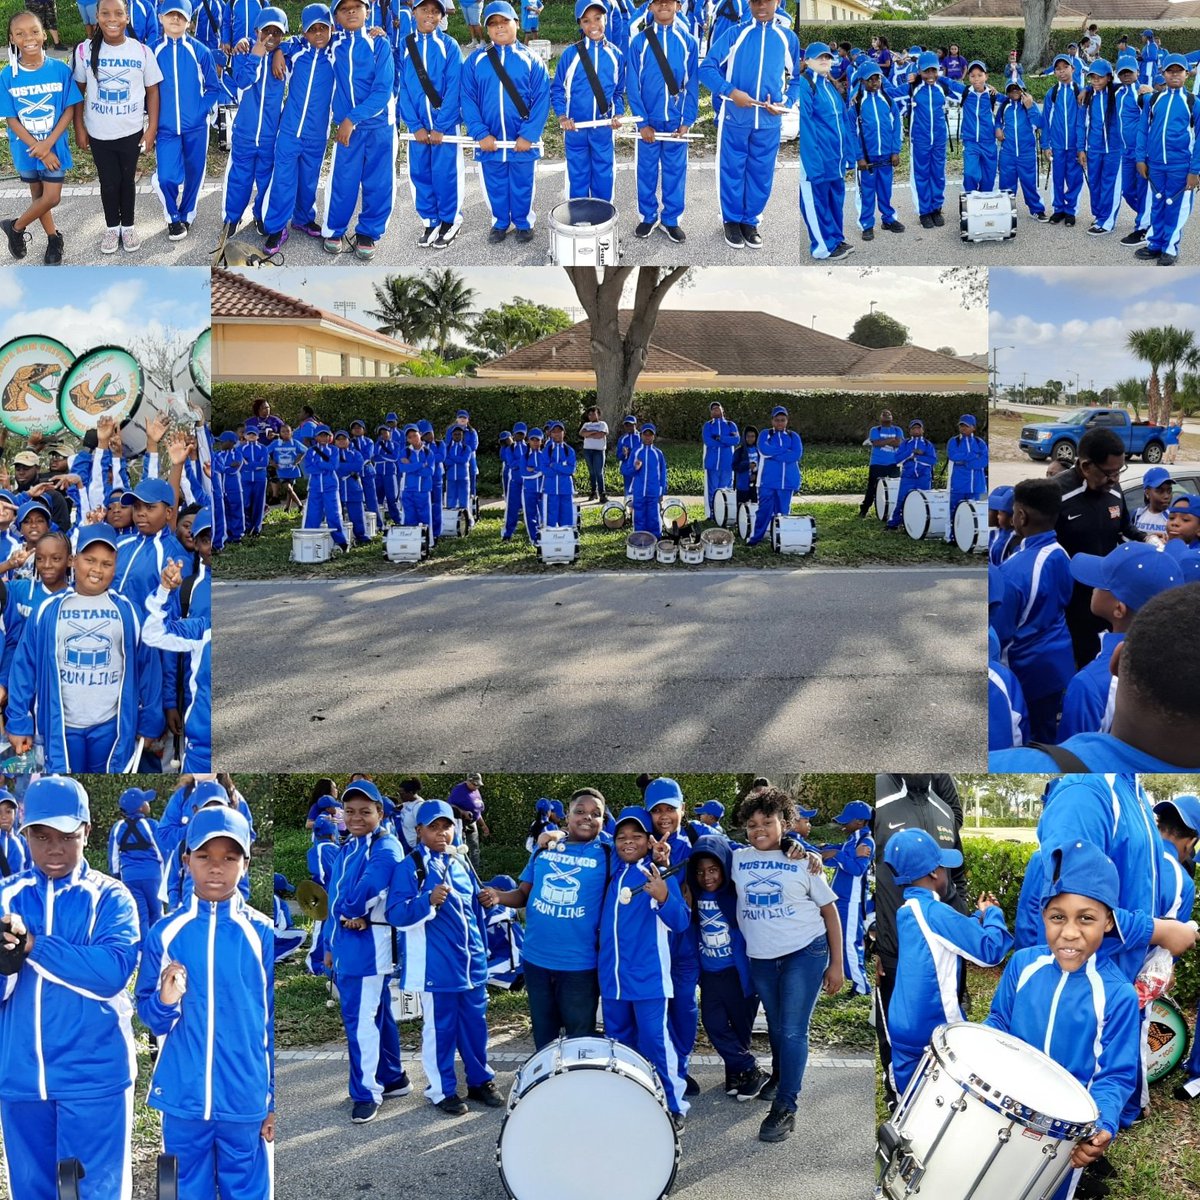 Mighty Mustangs!!! Our kids did a great job at the City of Riviera beach MLK parade and Suncoast Jamboree. Thank you the members of The Marching 100 you shared some wisdom with our babies. They loved every moment. @SLBrya @McKnight_WRES @Charlen57753460 @robinlbrown6